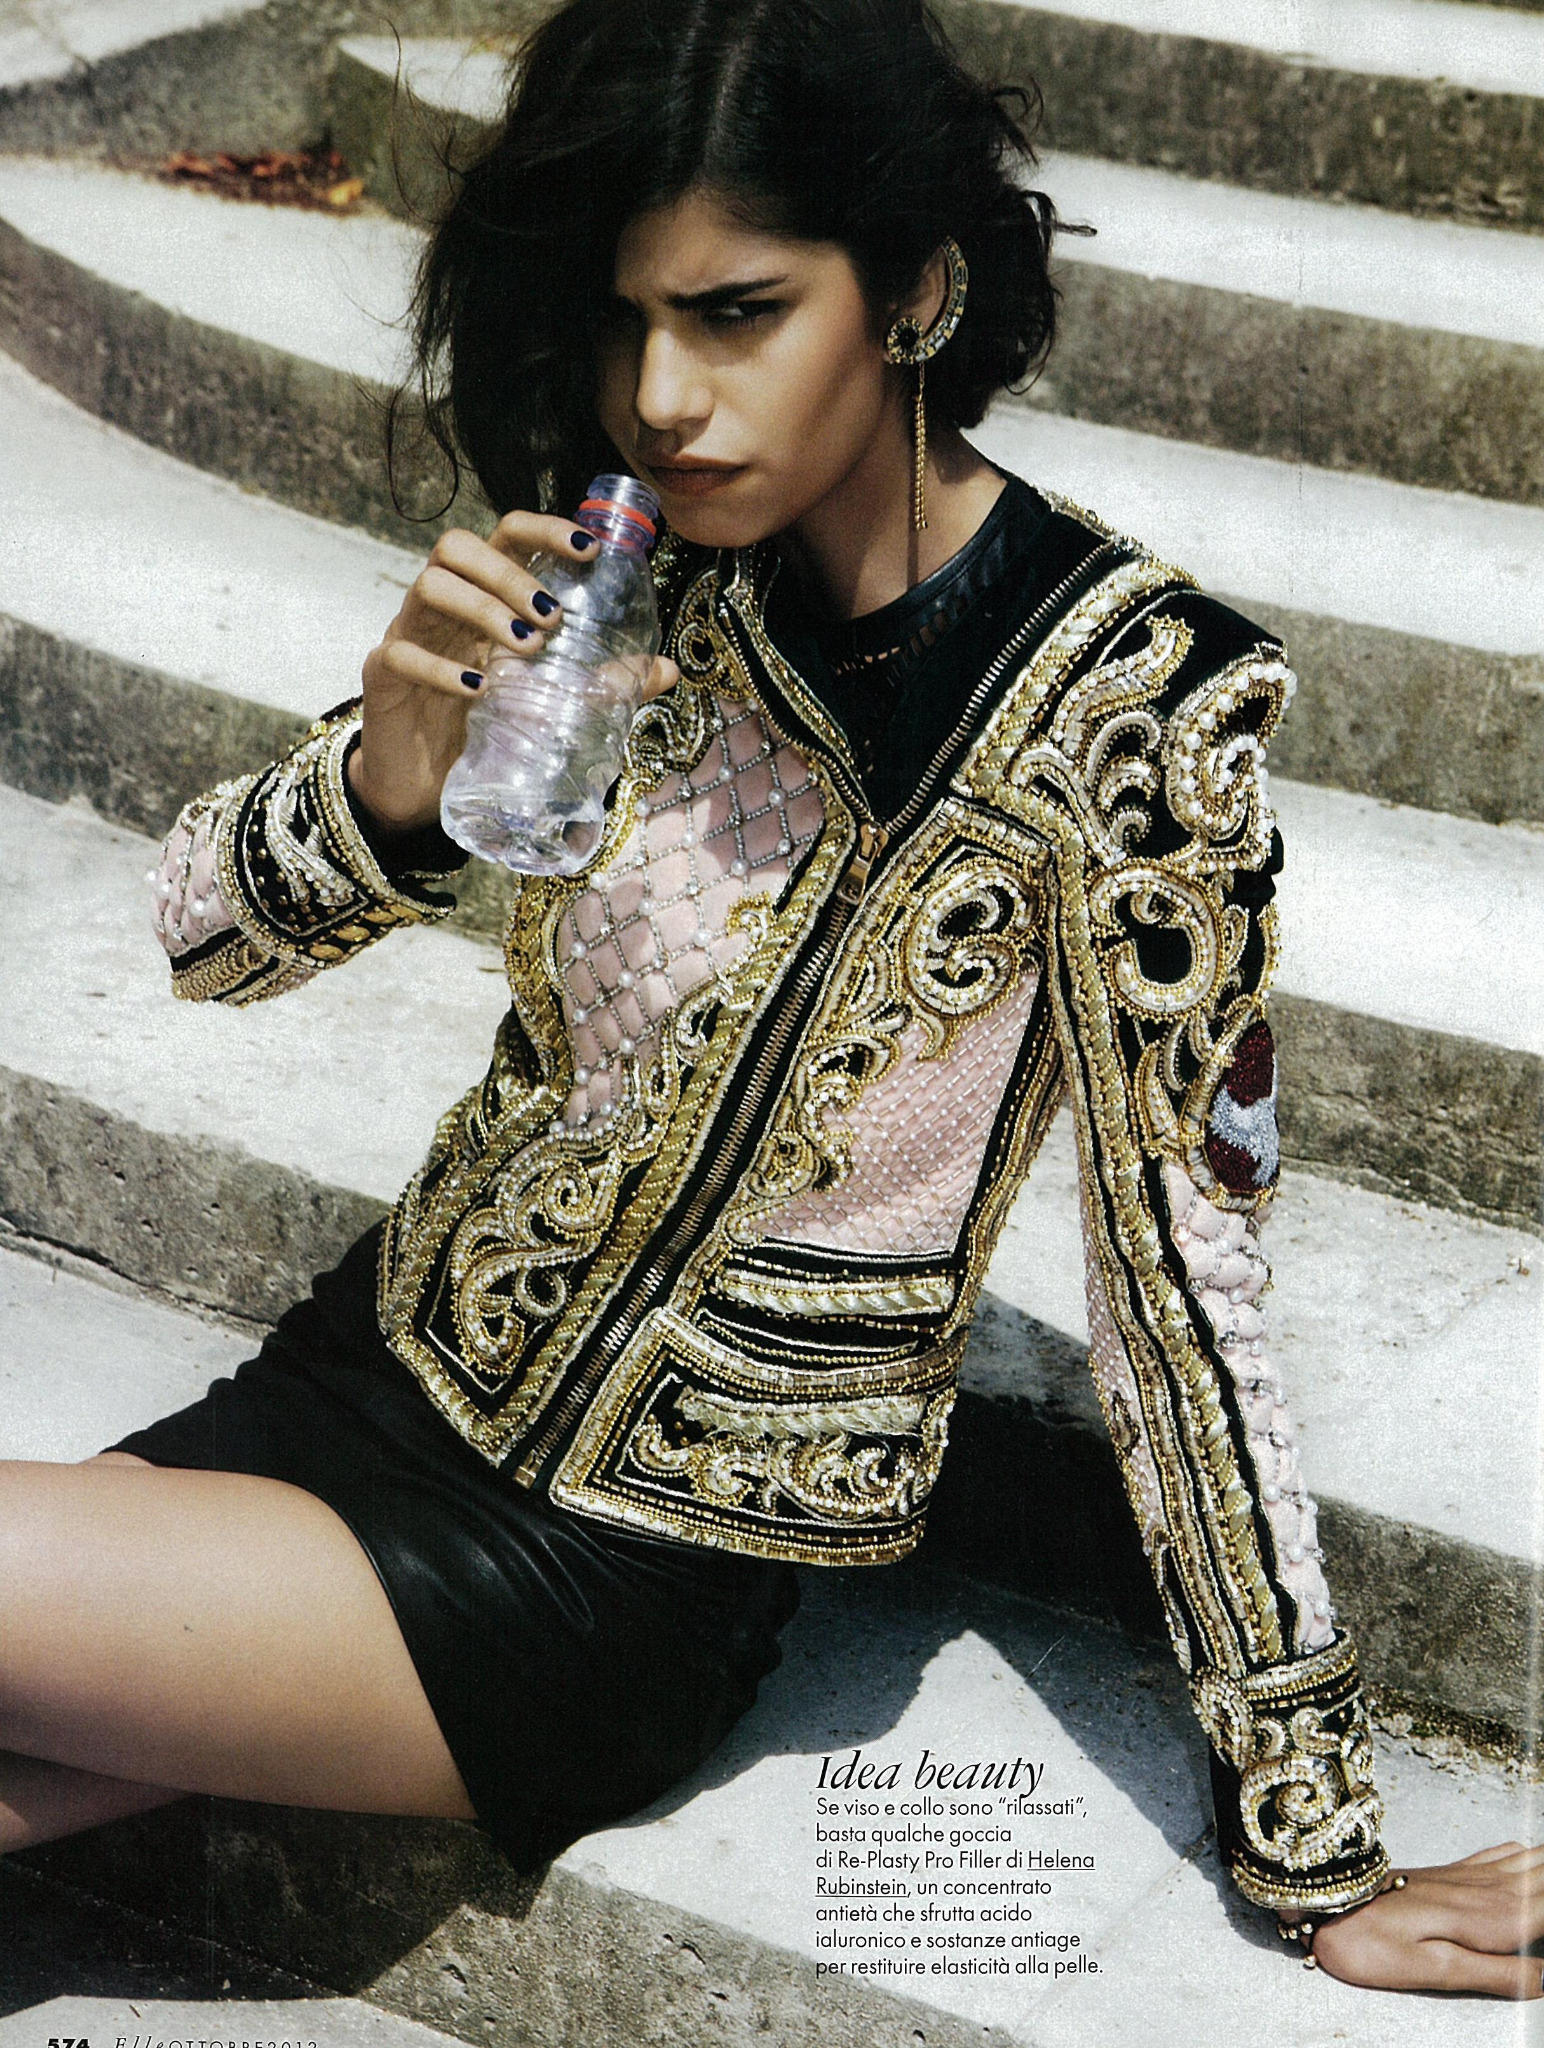 Balmain on X: "Balmain Pre-Fall 2012 look 19 embroidered jacket featured the issue of Elle Italy. Ph: Sinfonia Barocca http://t.co/Io51BApZ" / X